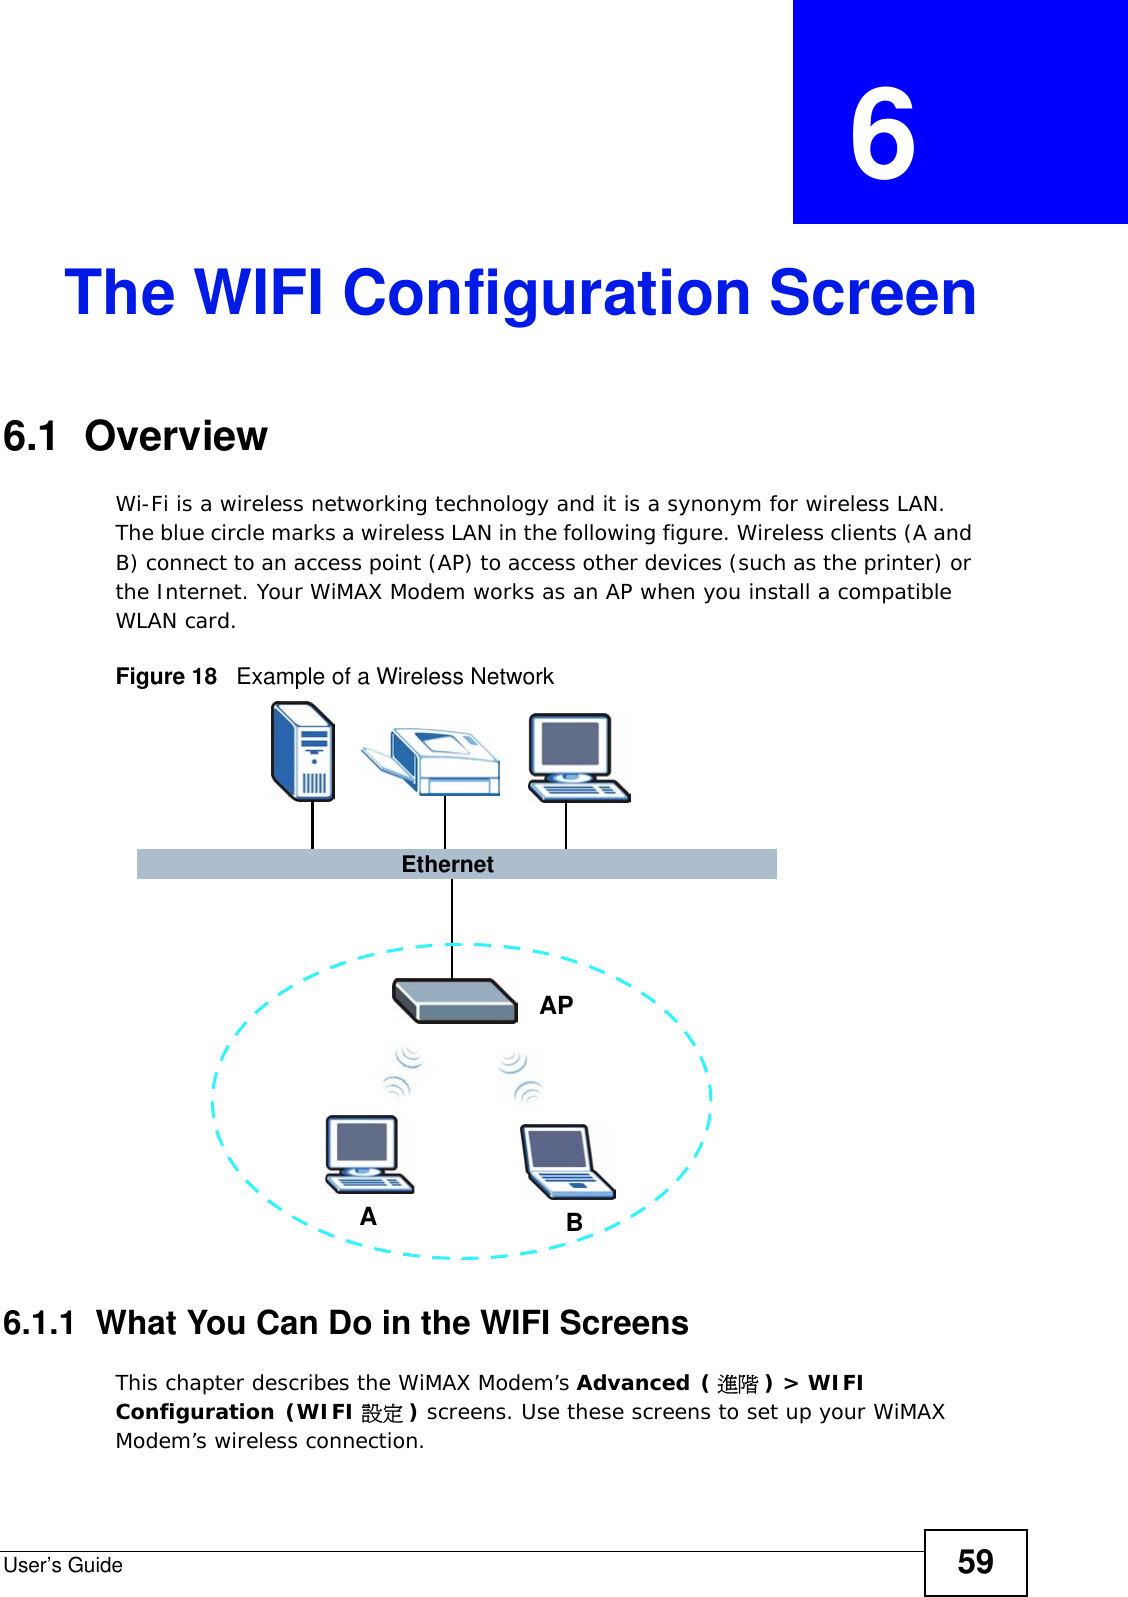 User’s Guide 59CHAPTER  6 The WIFI Configuration Screen6.1  Overview Wi-Fi is a wireless networking technology and it is a synonym for wireless LAN. The blue circle marks a wireless LAN in the following figure. Wireless clients (A and B) connect to an access point (AP) to access other devices (such as the printer) or the Internet. Your WiMAX Modem works as an AP when you install a compatible WLAN card.Figure 18   Example of a Wireless Network6.1.1  What You Can Do in the WIFI ScreensThis chapter describes the WiMAX Modem’s Advanced (進階 ) &gt; WIFI Configuration (WIFI 設定 ) screens. Use these screens to set up your WiMAX Modem’s wireless connection.ABAPEthernet